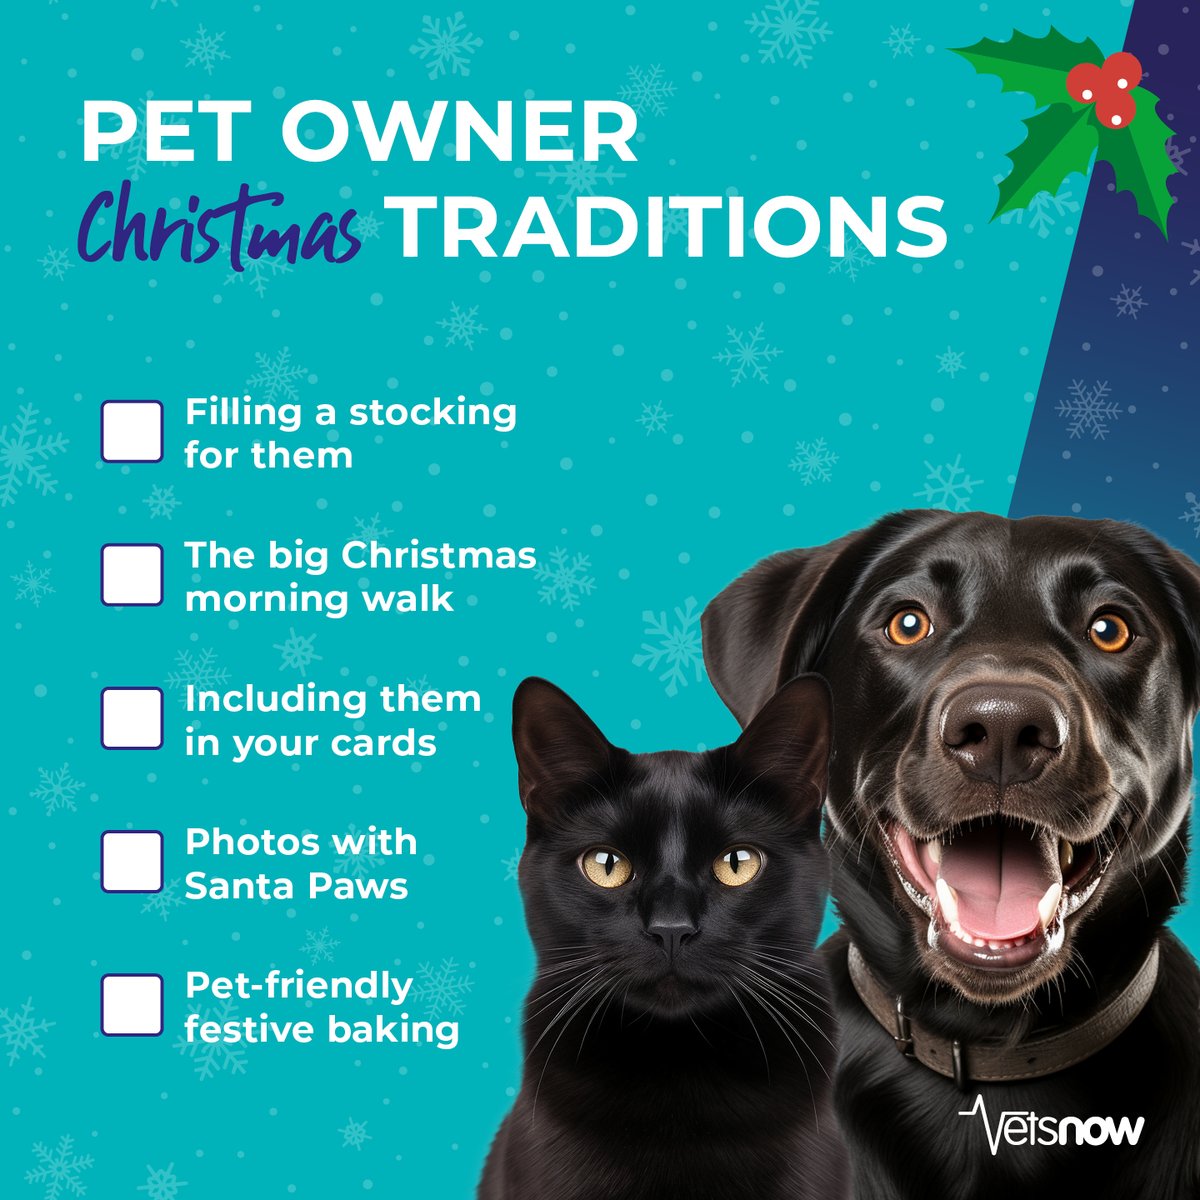 Out of 5, how many boxes do you tick off with your pet? ✅🐾 Let us know in the comments if you have any special festive traditions with your furry companions. 🥰